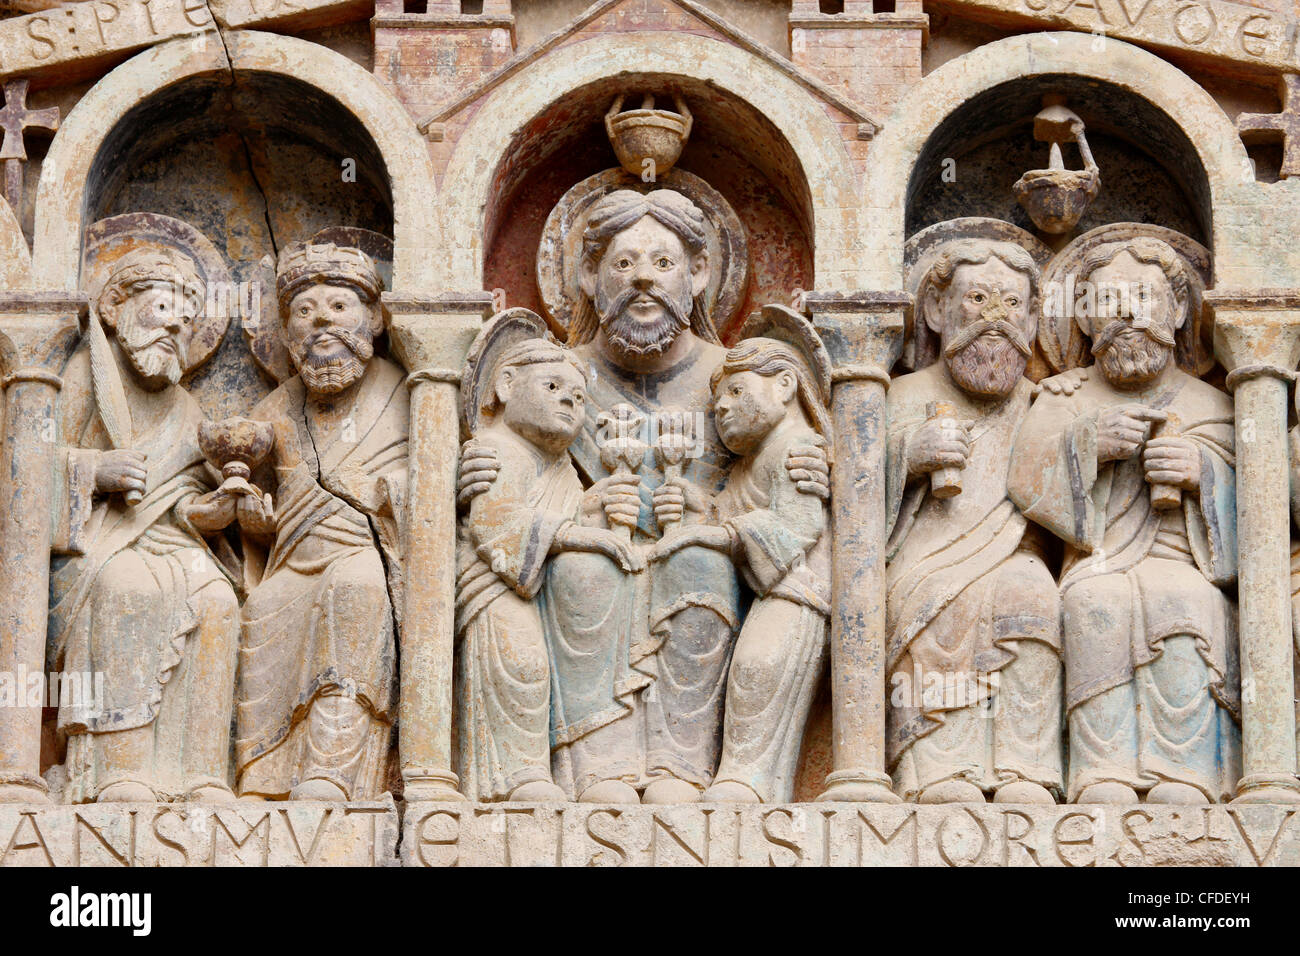 Tympanum showing Abraham, Sainte Foy Abbey church, Conques, Aveyron, Massif Central, France, Europe Stock Photo